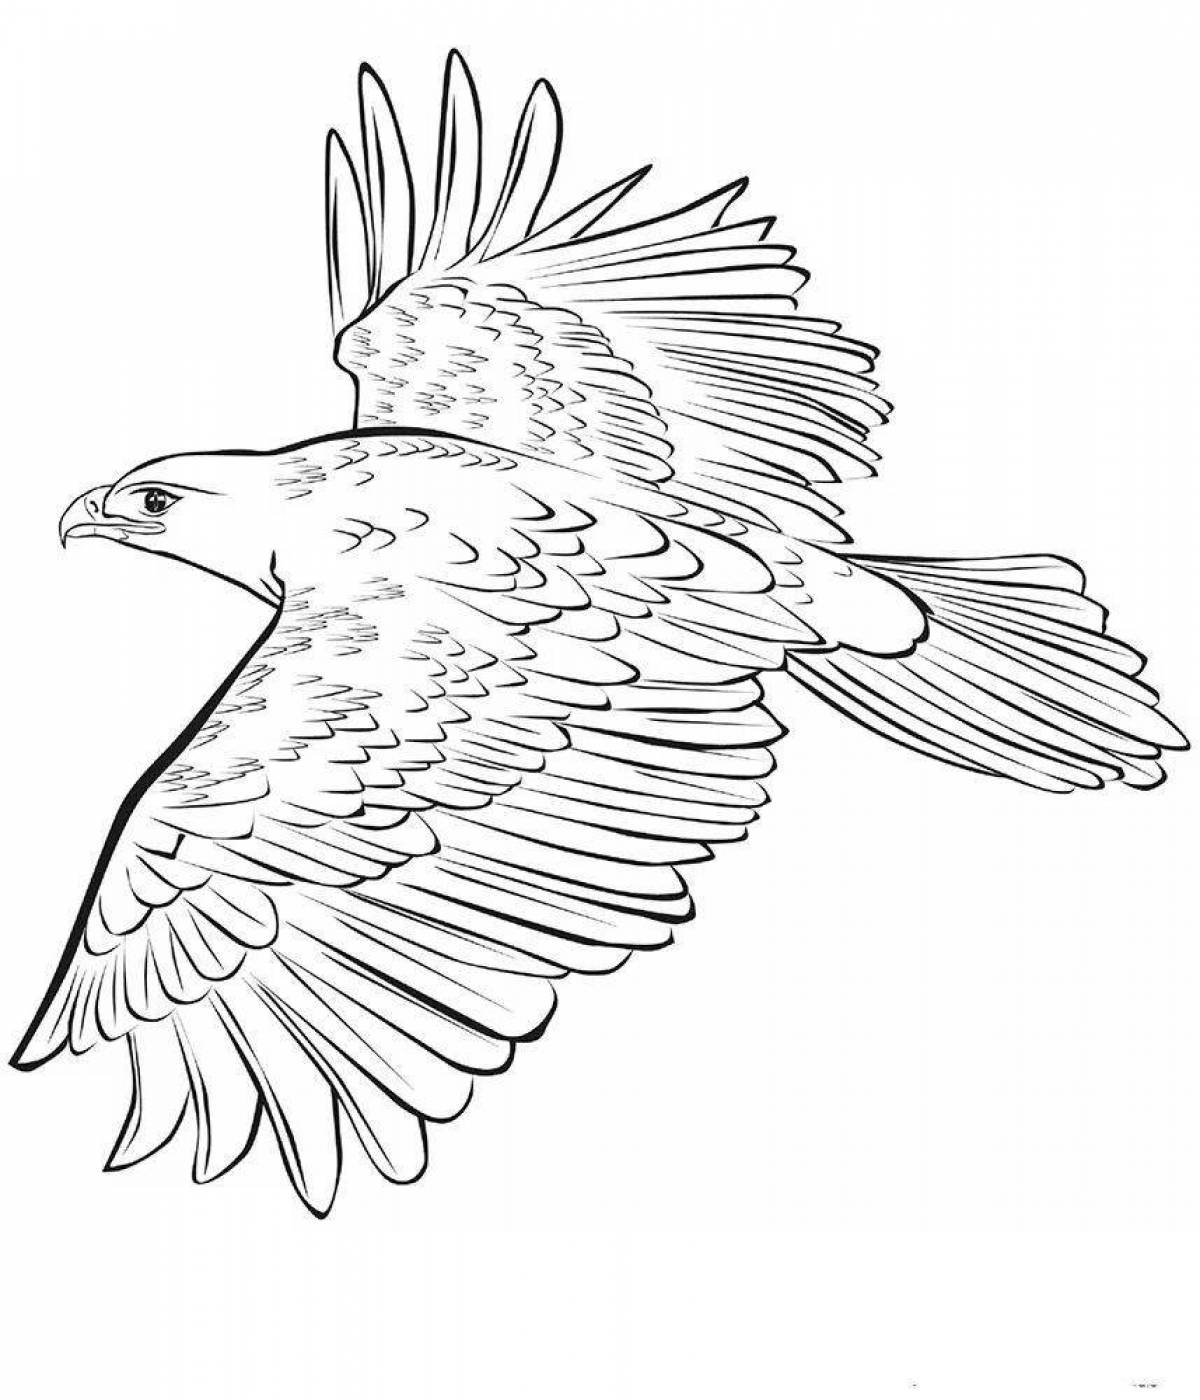 Coloring book white-tailed eagle with rich hues